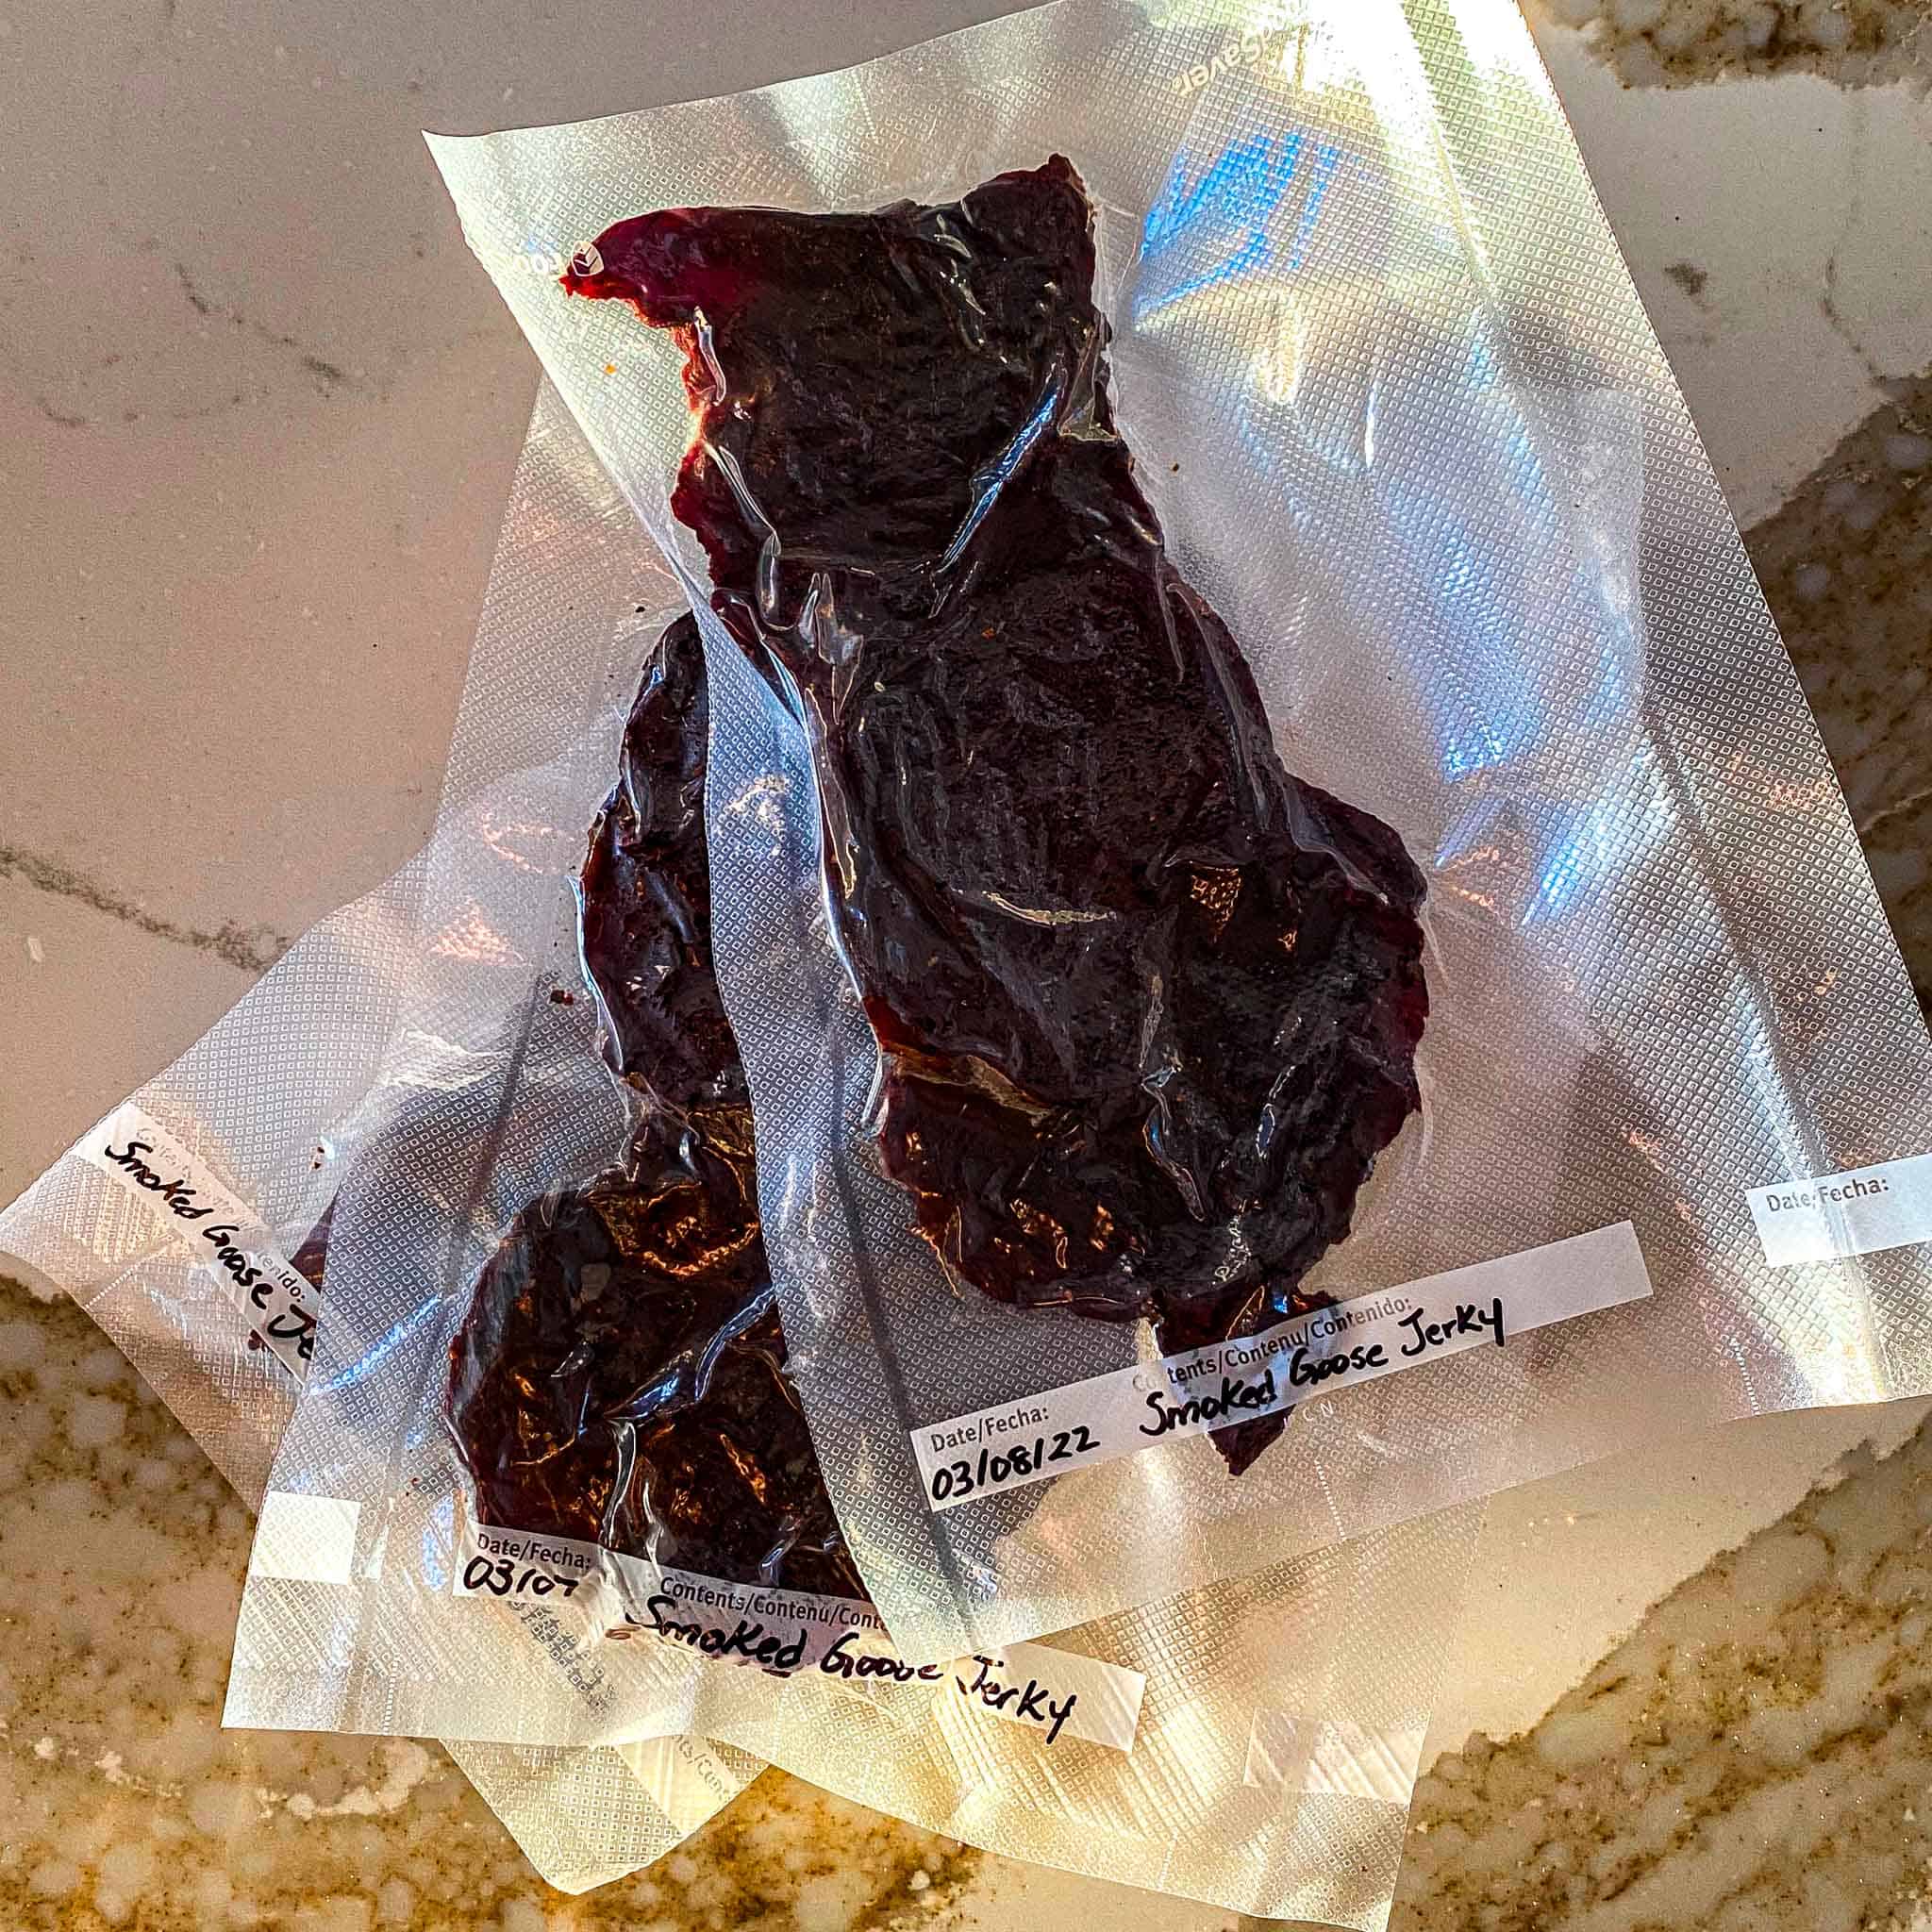 Goose jerky vacuum sealed in airtight bags and labelled for storage.